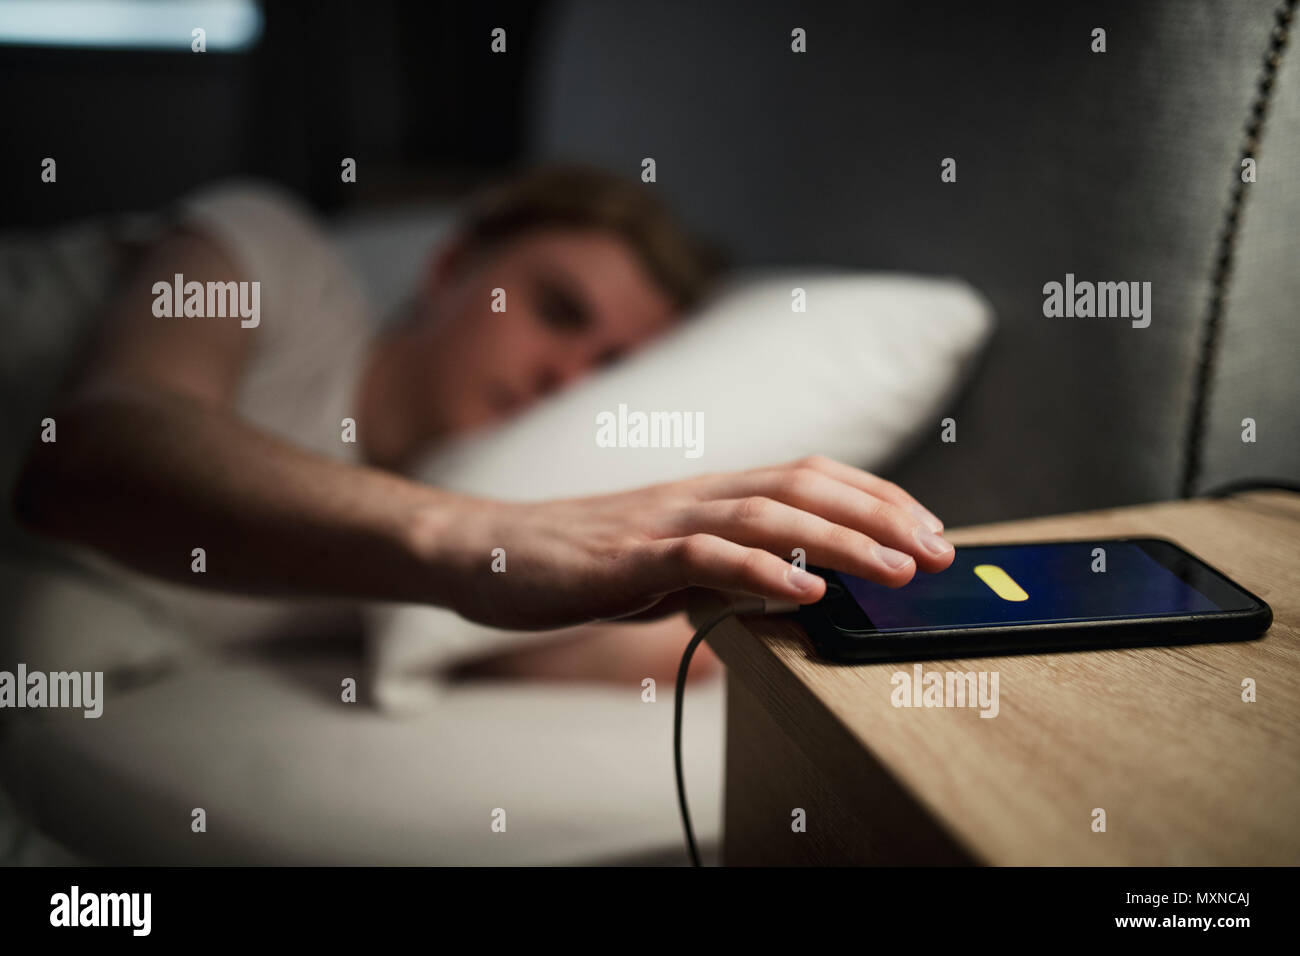 Young adult male struggling on a morning to wake up, hitting snooze on his alarm. Stock Photo